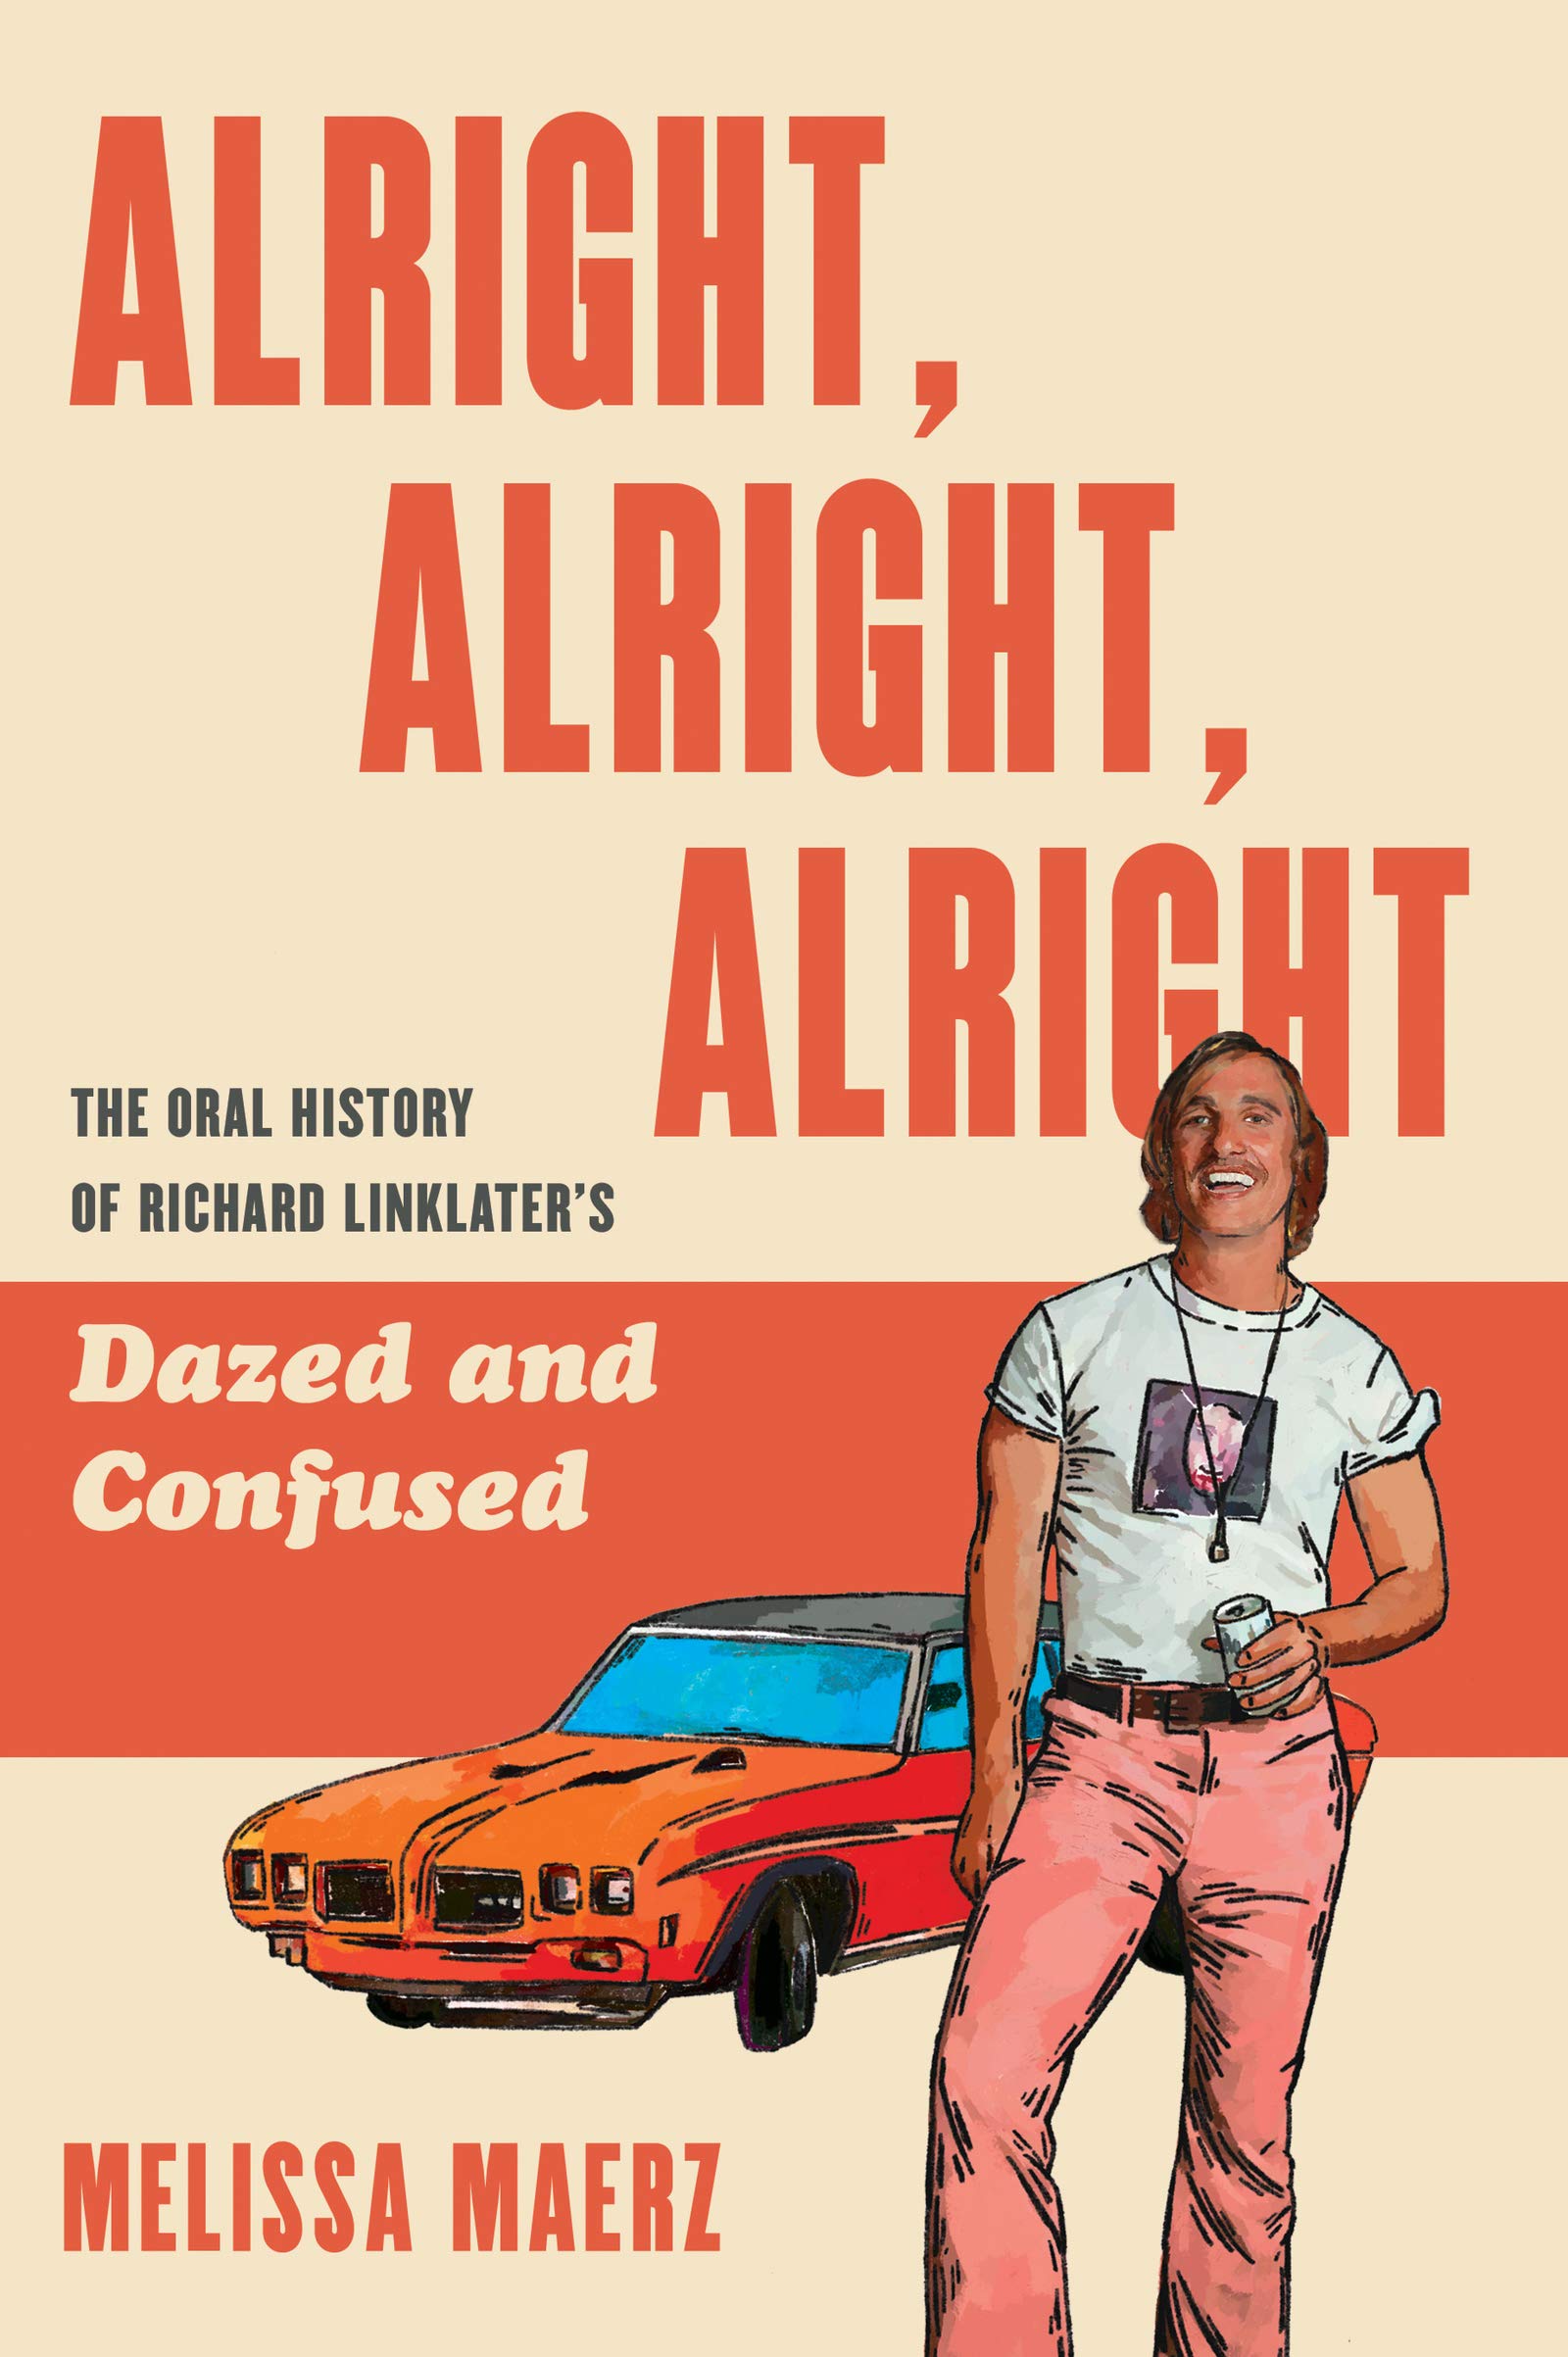 9. Alright, Alright, Alright: The Oral History of Richard Linklater’s ‘Dazed and Confused’ by Melissa Maerz